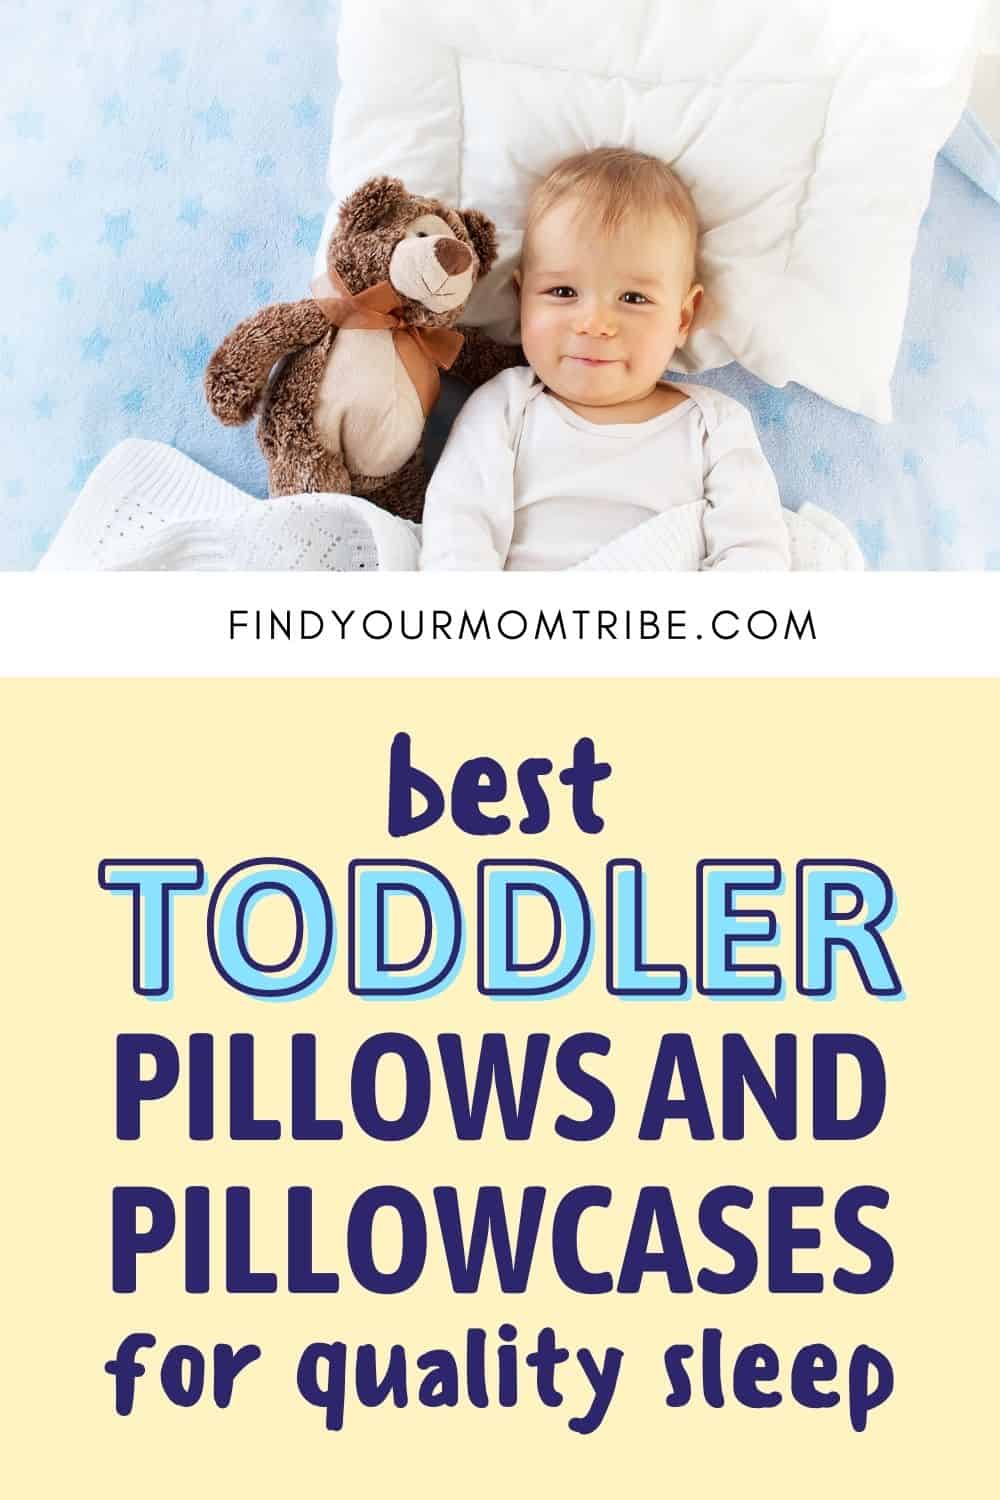 Best Toddler Pillows And Pillowcases For Quality Sleep Pinterest